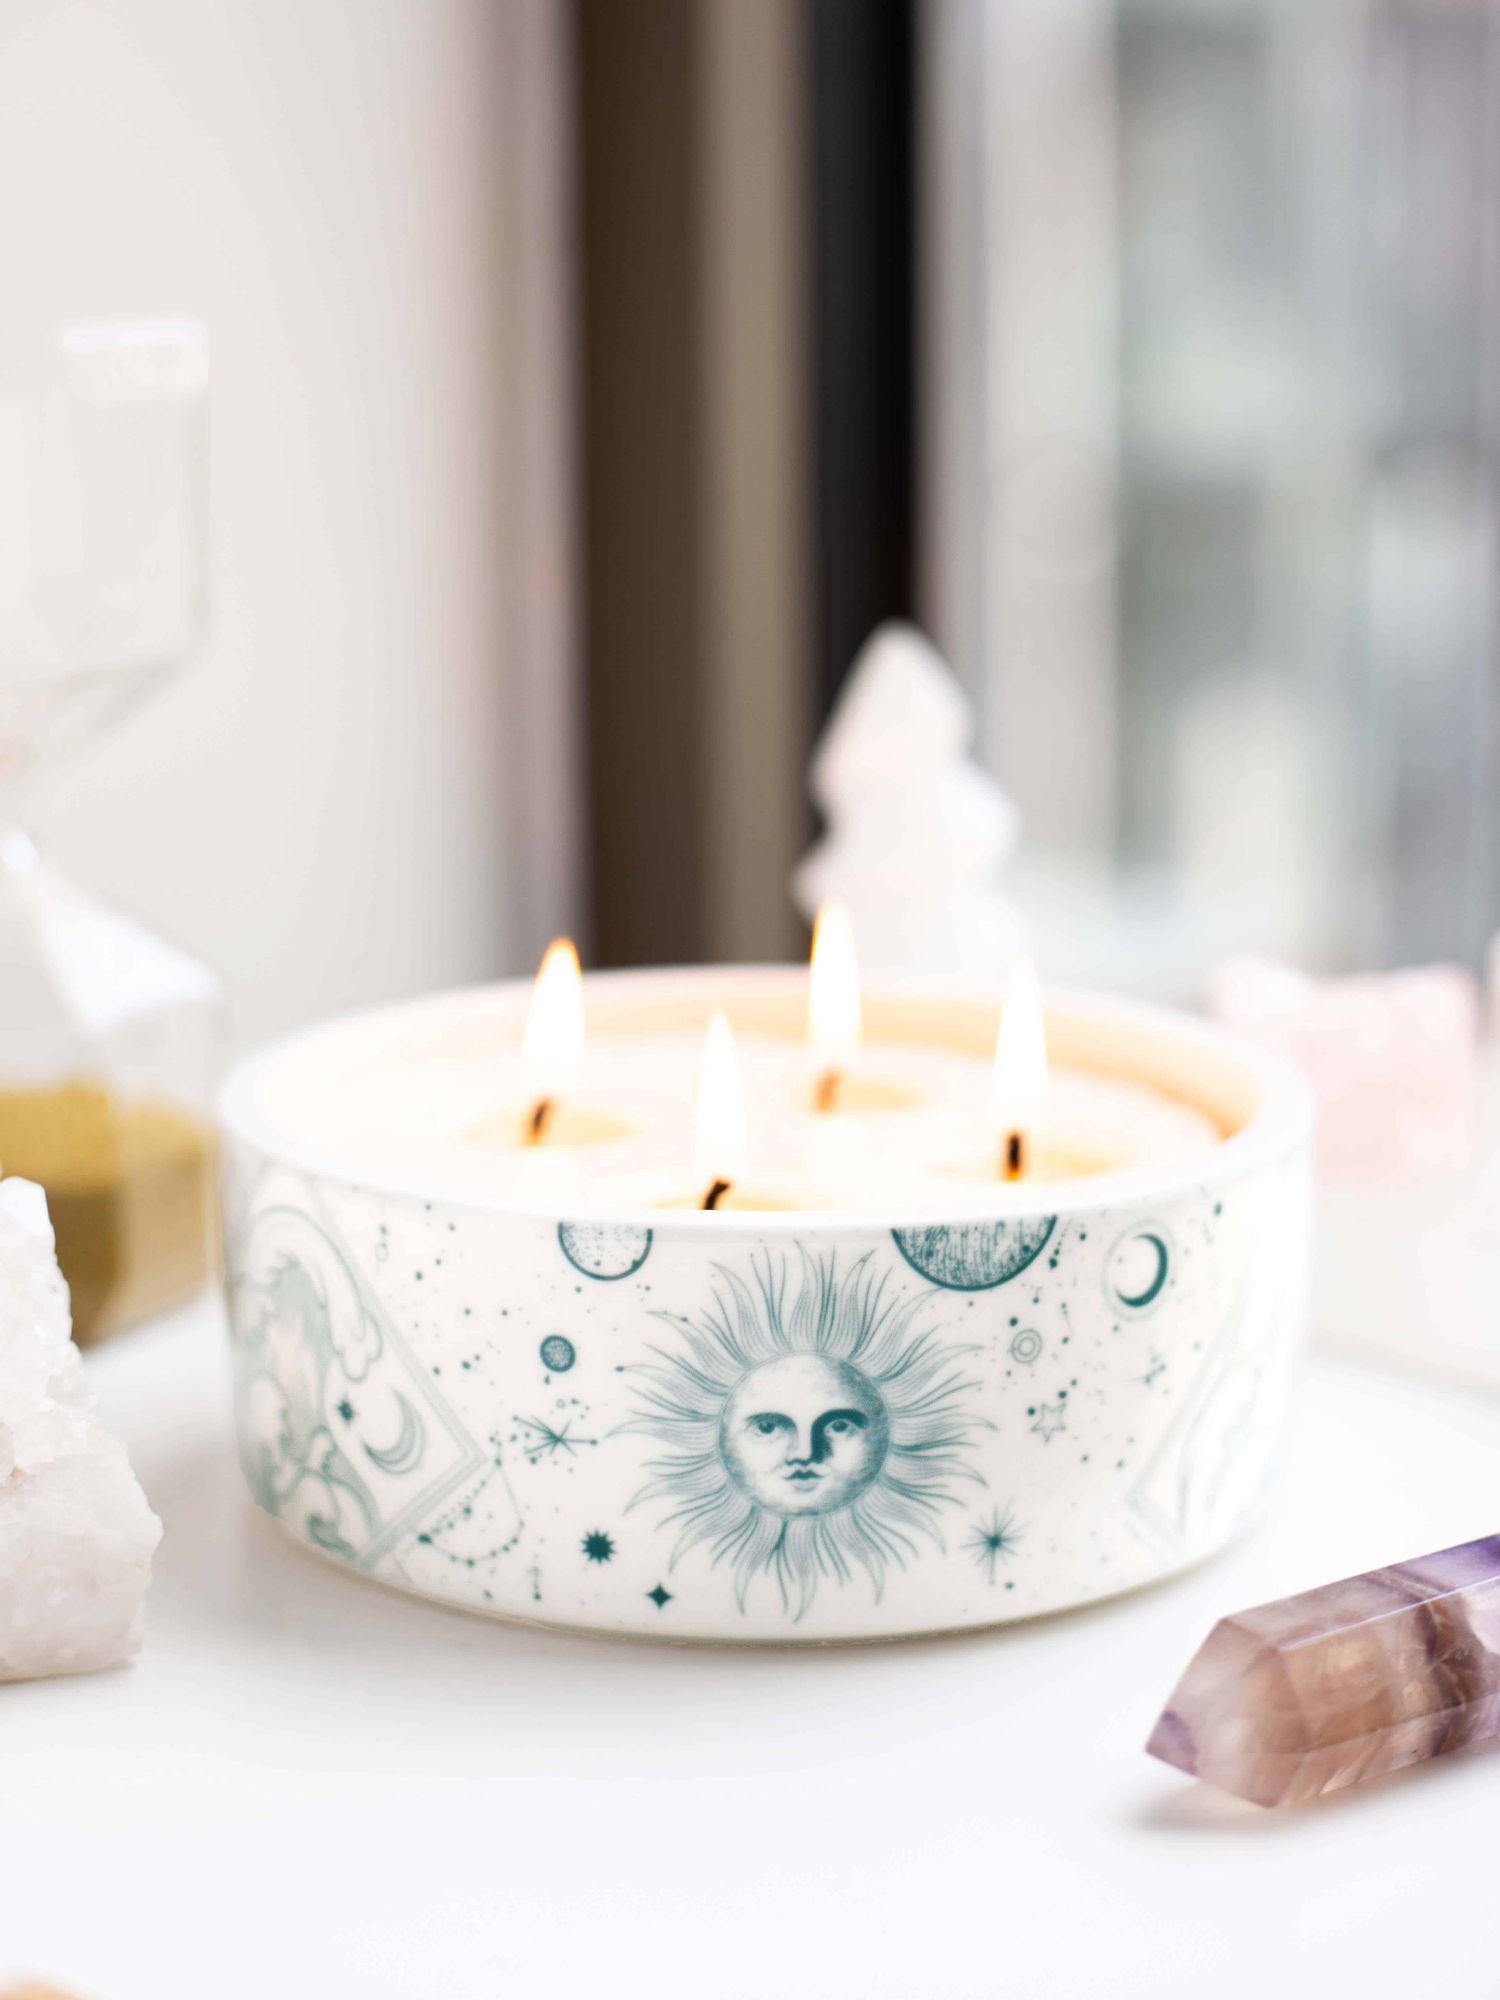 four wick candle with a ceramic vessel design of whimsical constellations, stars, planets and the sun in the middle